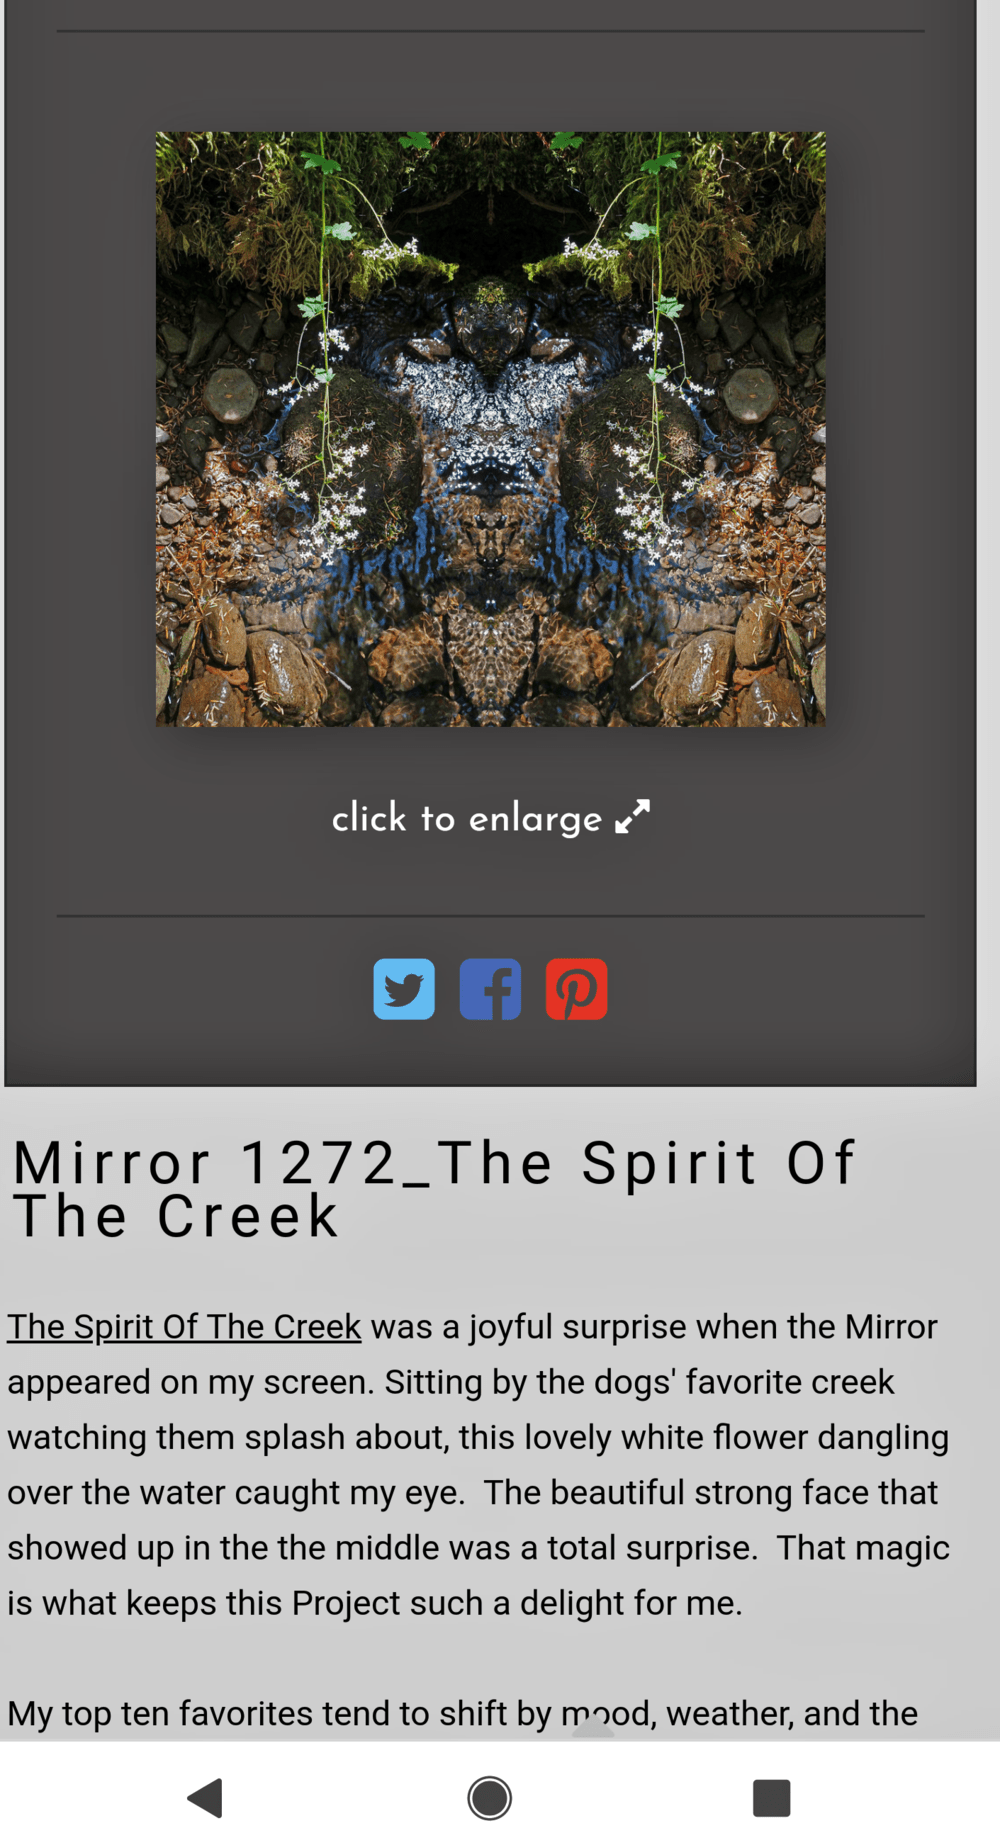 First view of Mirror 1272 on the website (minus some story, because, well, it's a Phone screenshot.).